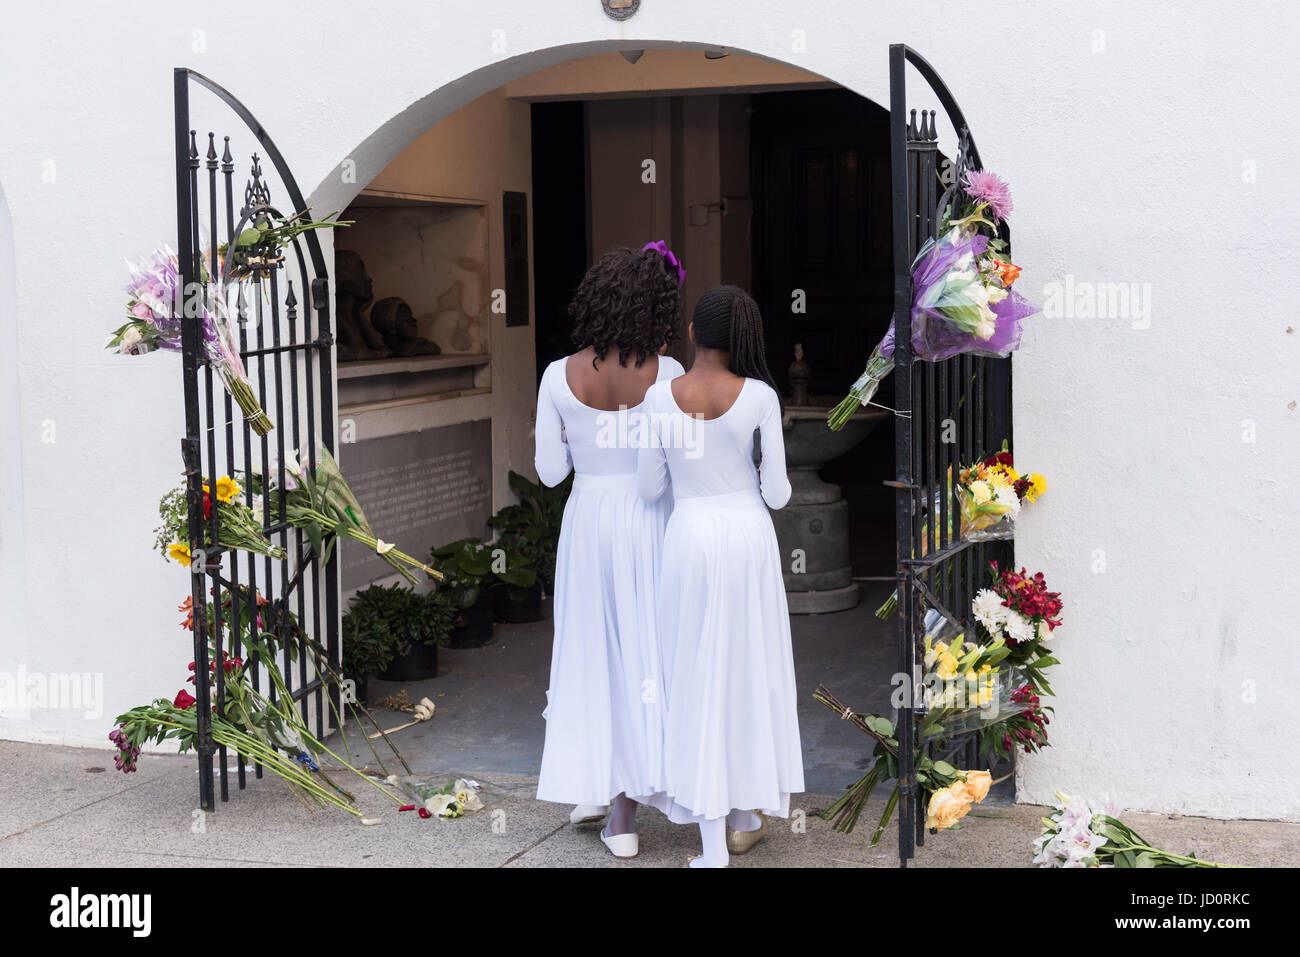 Charleston, South Carolina, USA. 17th June, 2017. Young members of the praise dance group of the Mother Emanuel African Methodist Episcopal Church view floral tributes left at the church on the 2nd anniversary of the mass shooting June 17, 2017 in Charleston, South Carolina. Nine members of the historic African-American church were gunned down by a white supremacist during bible study on June 17, 2015. Credit: Planetpix/Alamy Live News Stock Photo